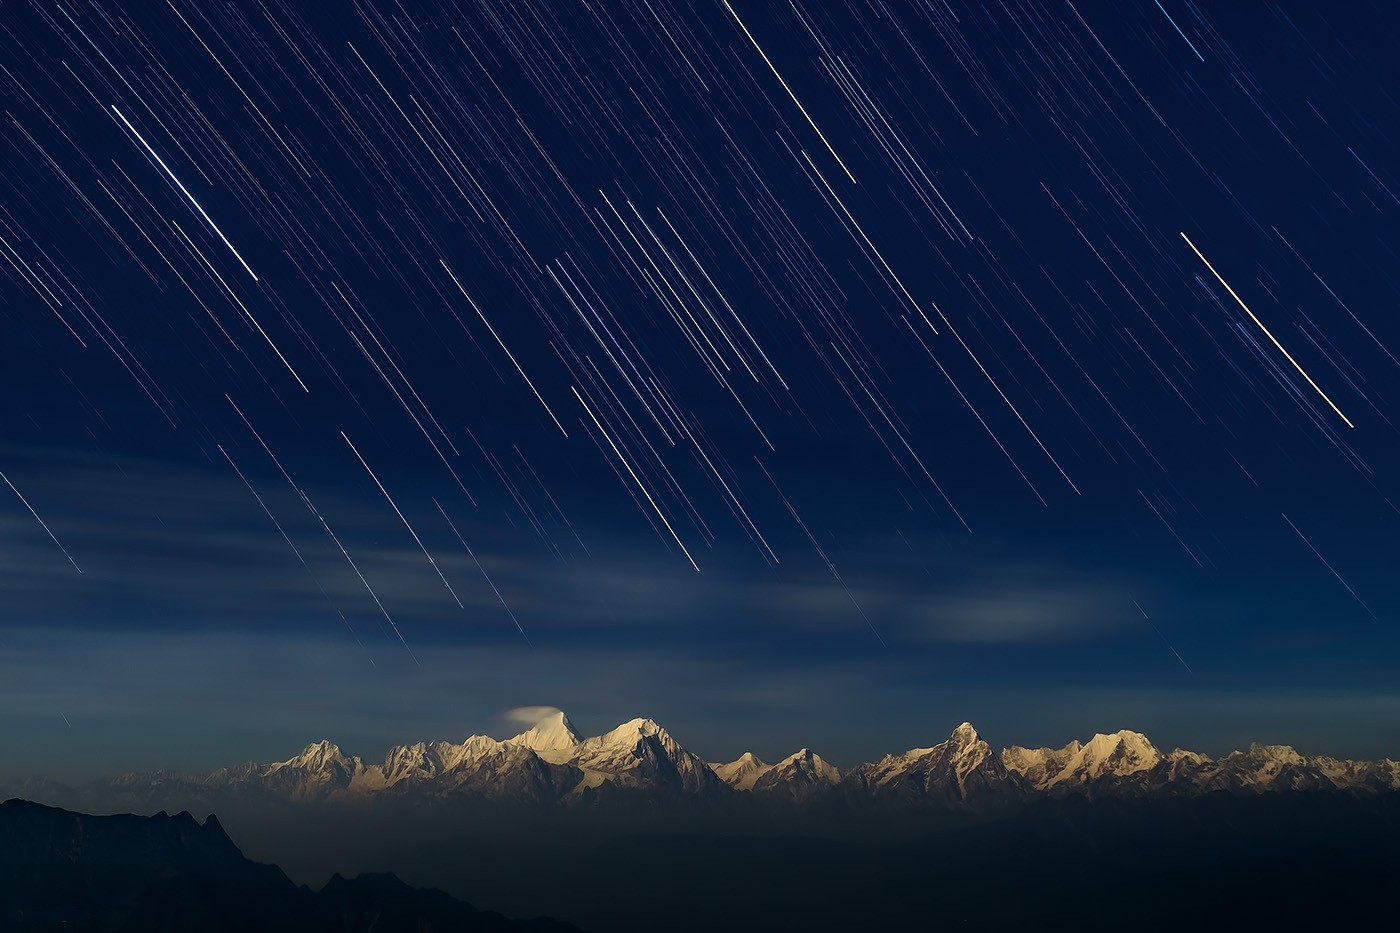 General 1400x933 photography landscape nature stars mountains starry night snowy peak long exposure sky Himalayas China moonlight Asia